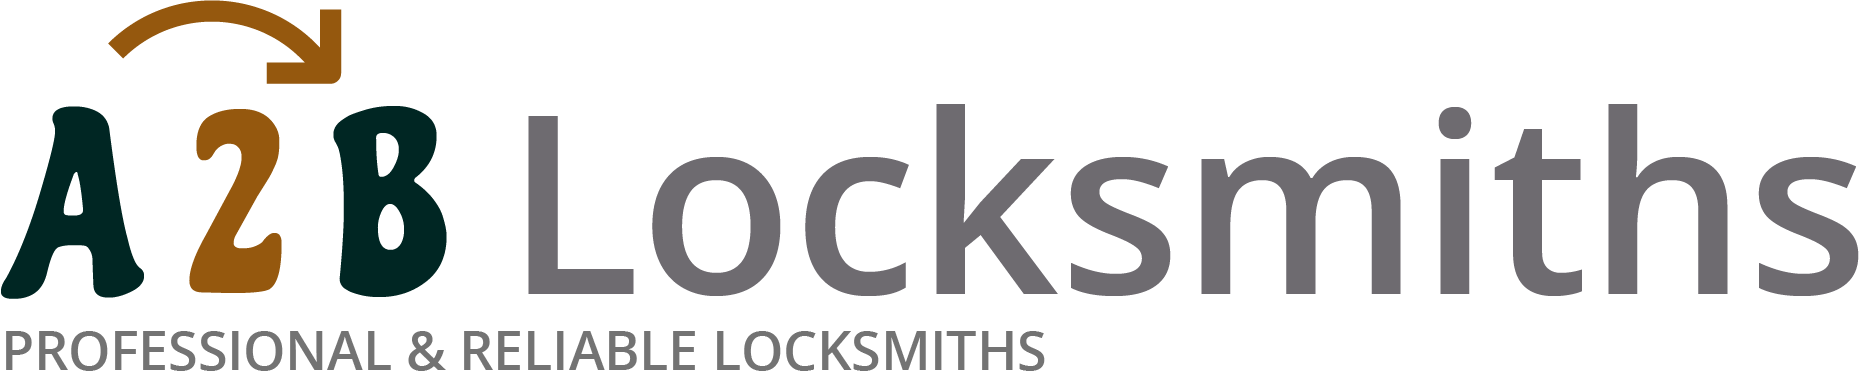 If you are locked out of house in Clapham, our 24/7 local emergency locksmith services can help you.